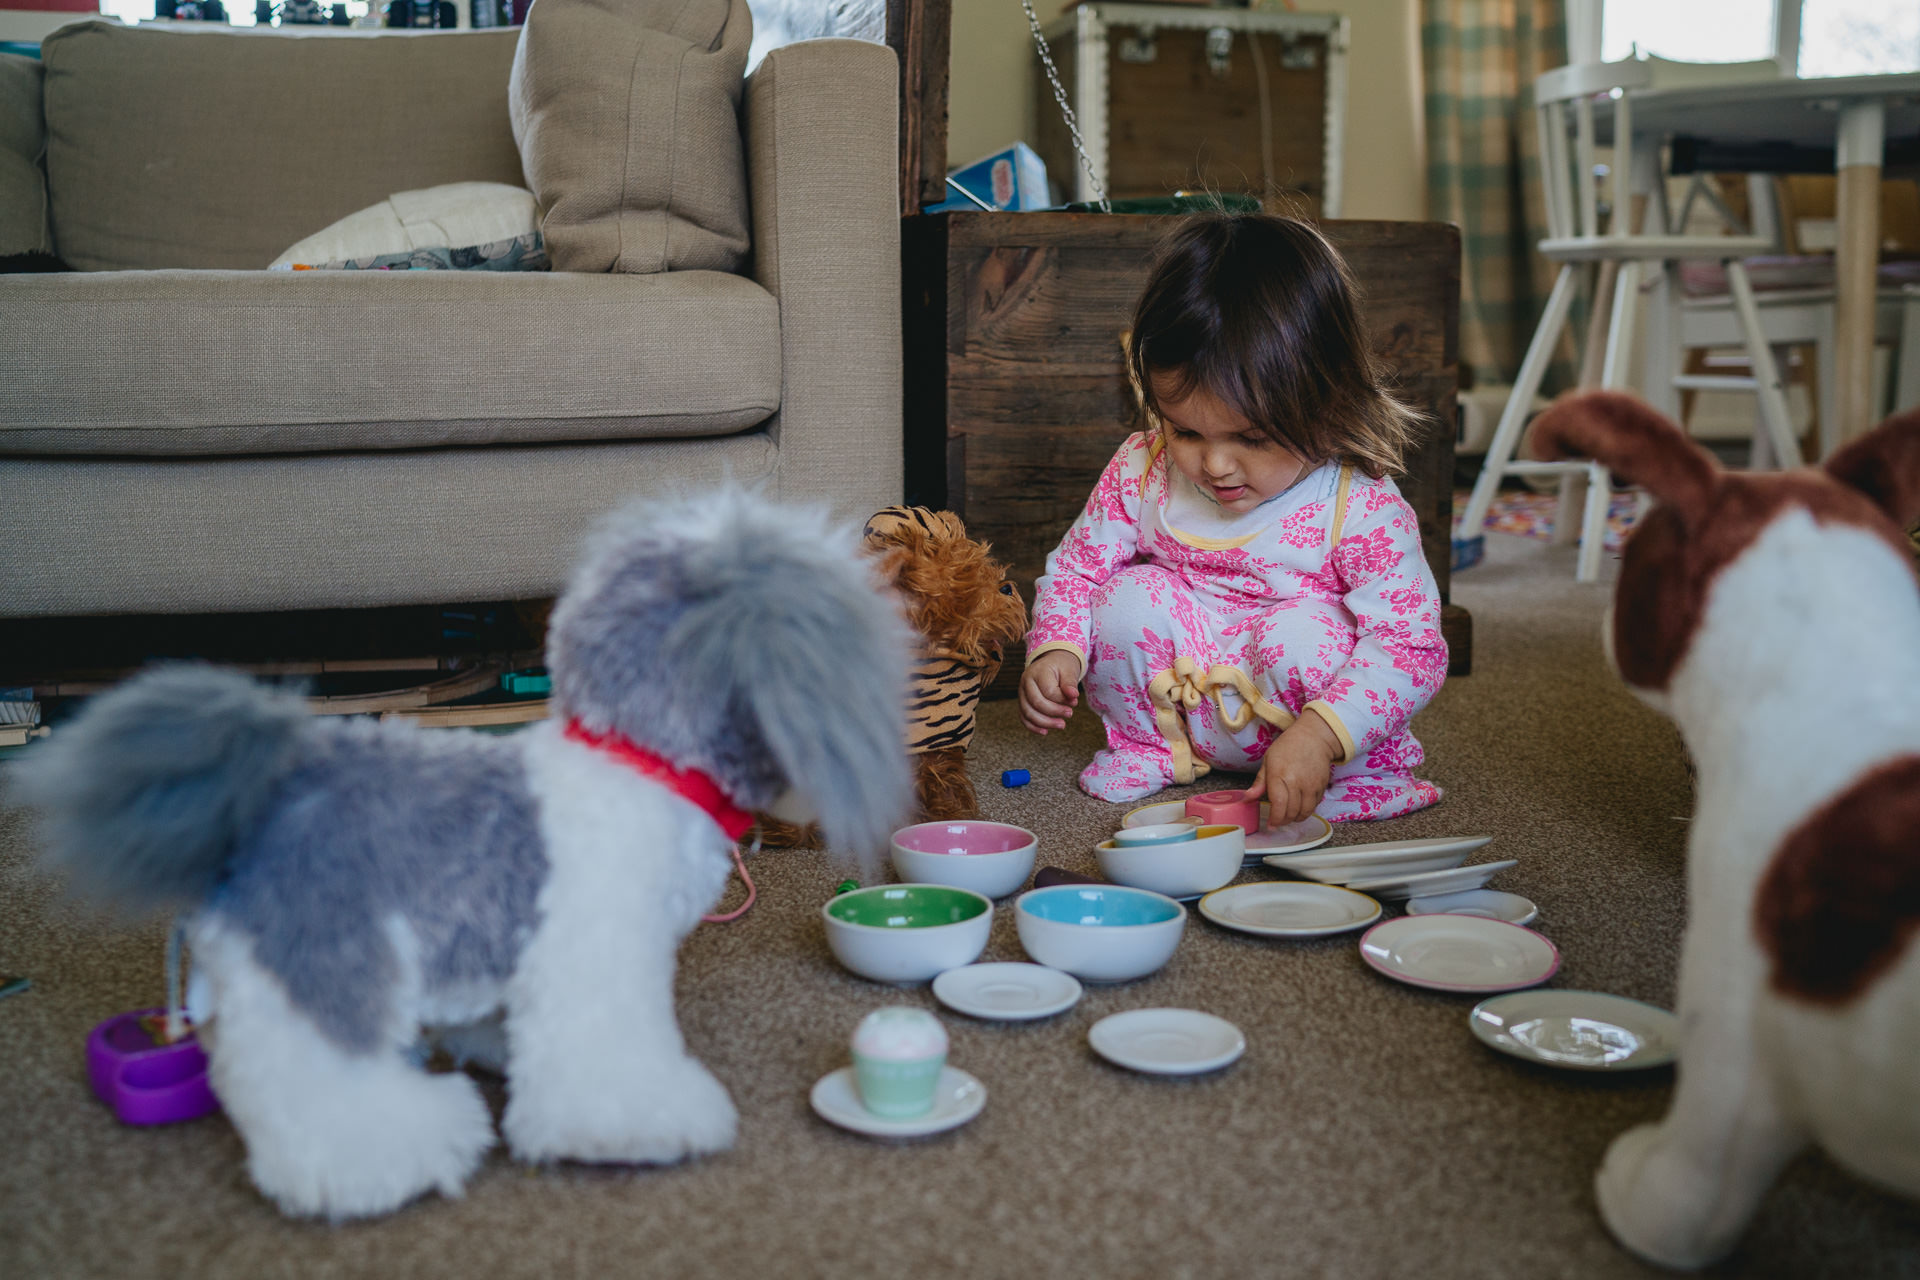 A young girl playing at home with her toys